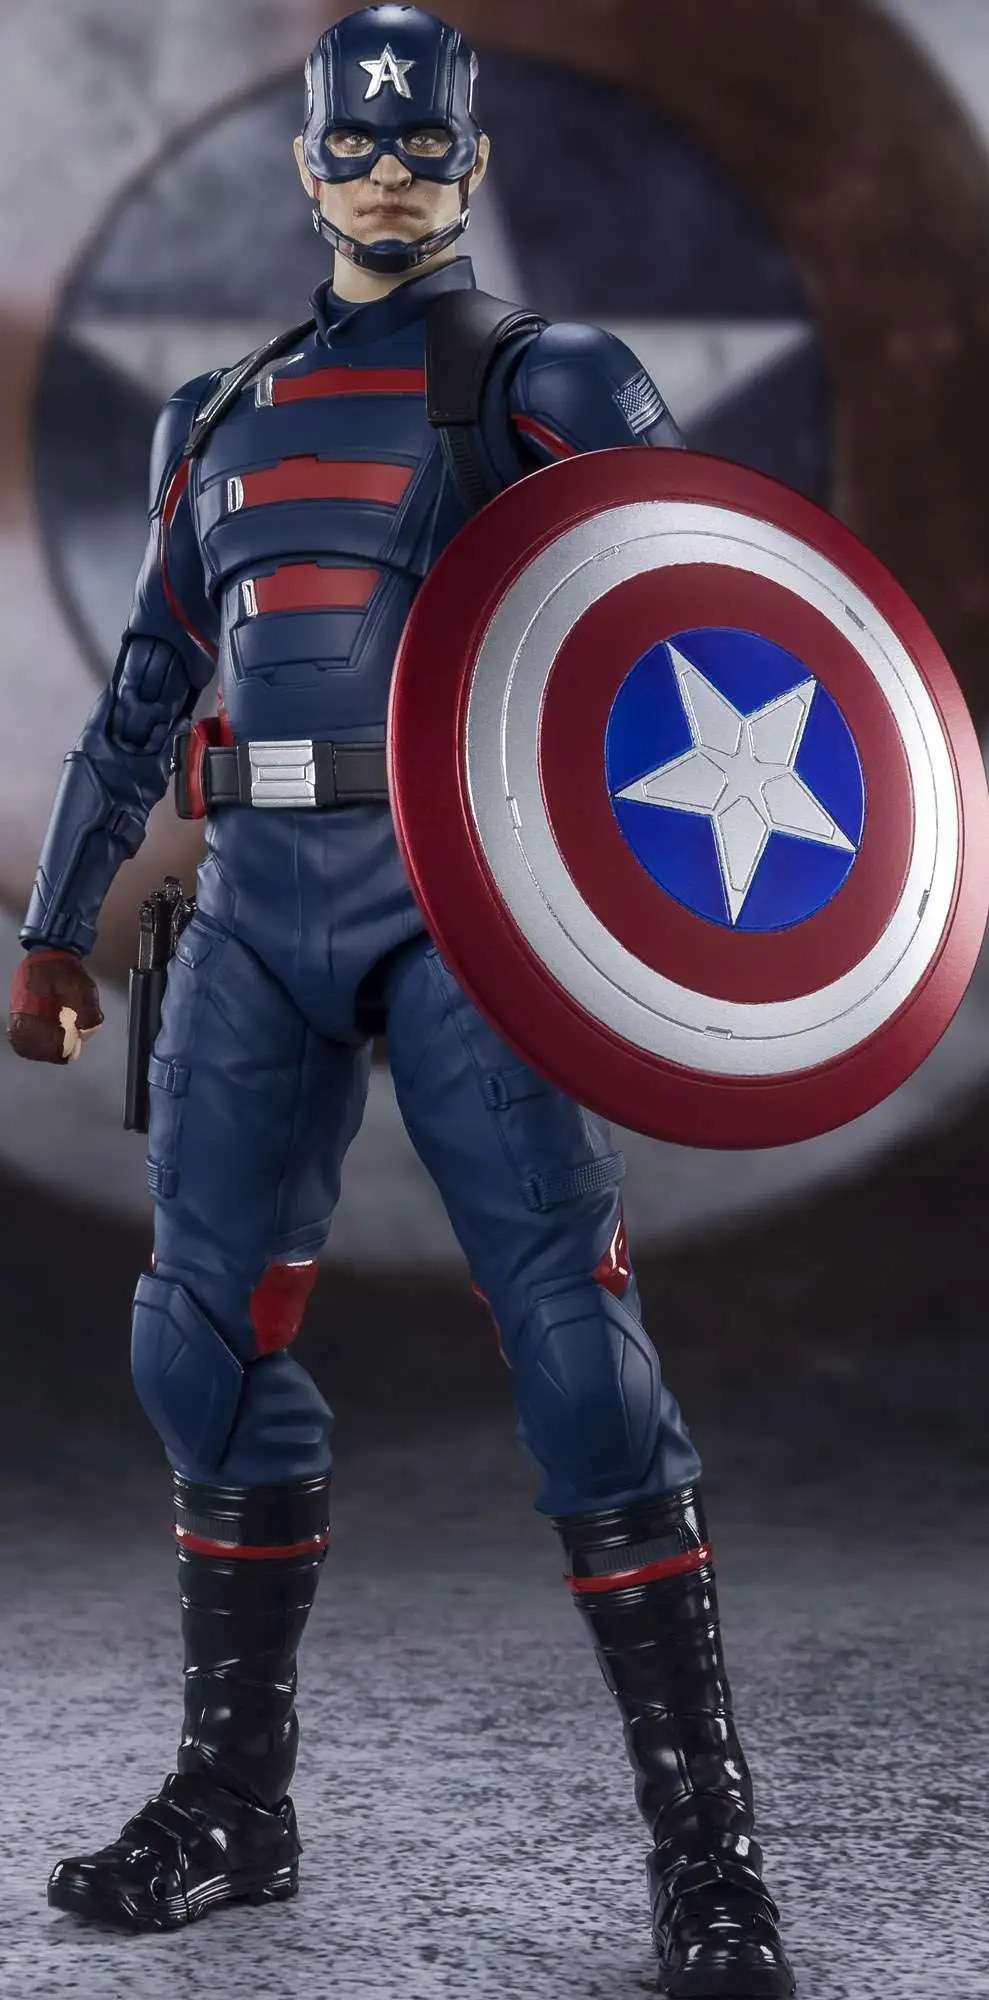 Infinity War CAPTAIN AMERICA Figure with box S.H Figuarts SHF Avengers 